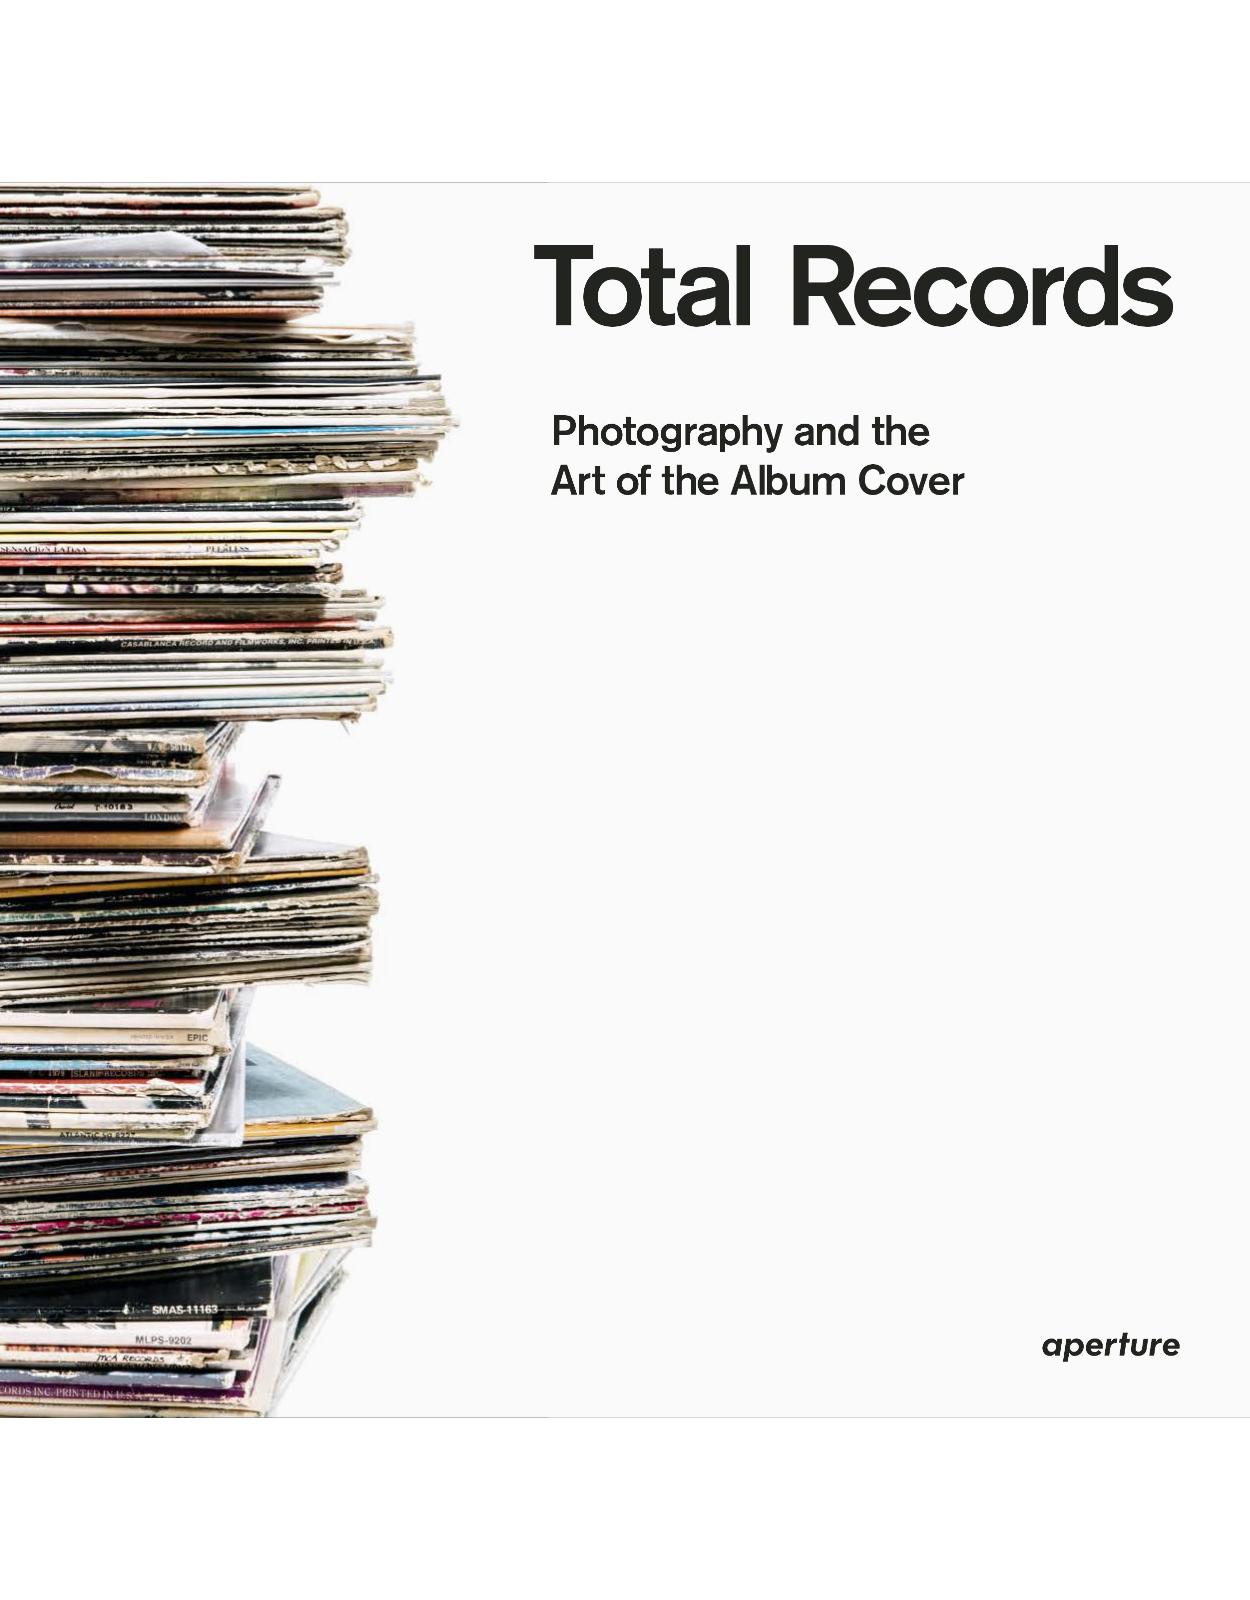 Total Records: Photography and the Art of the Album Cover